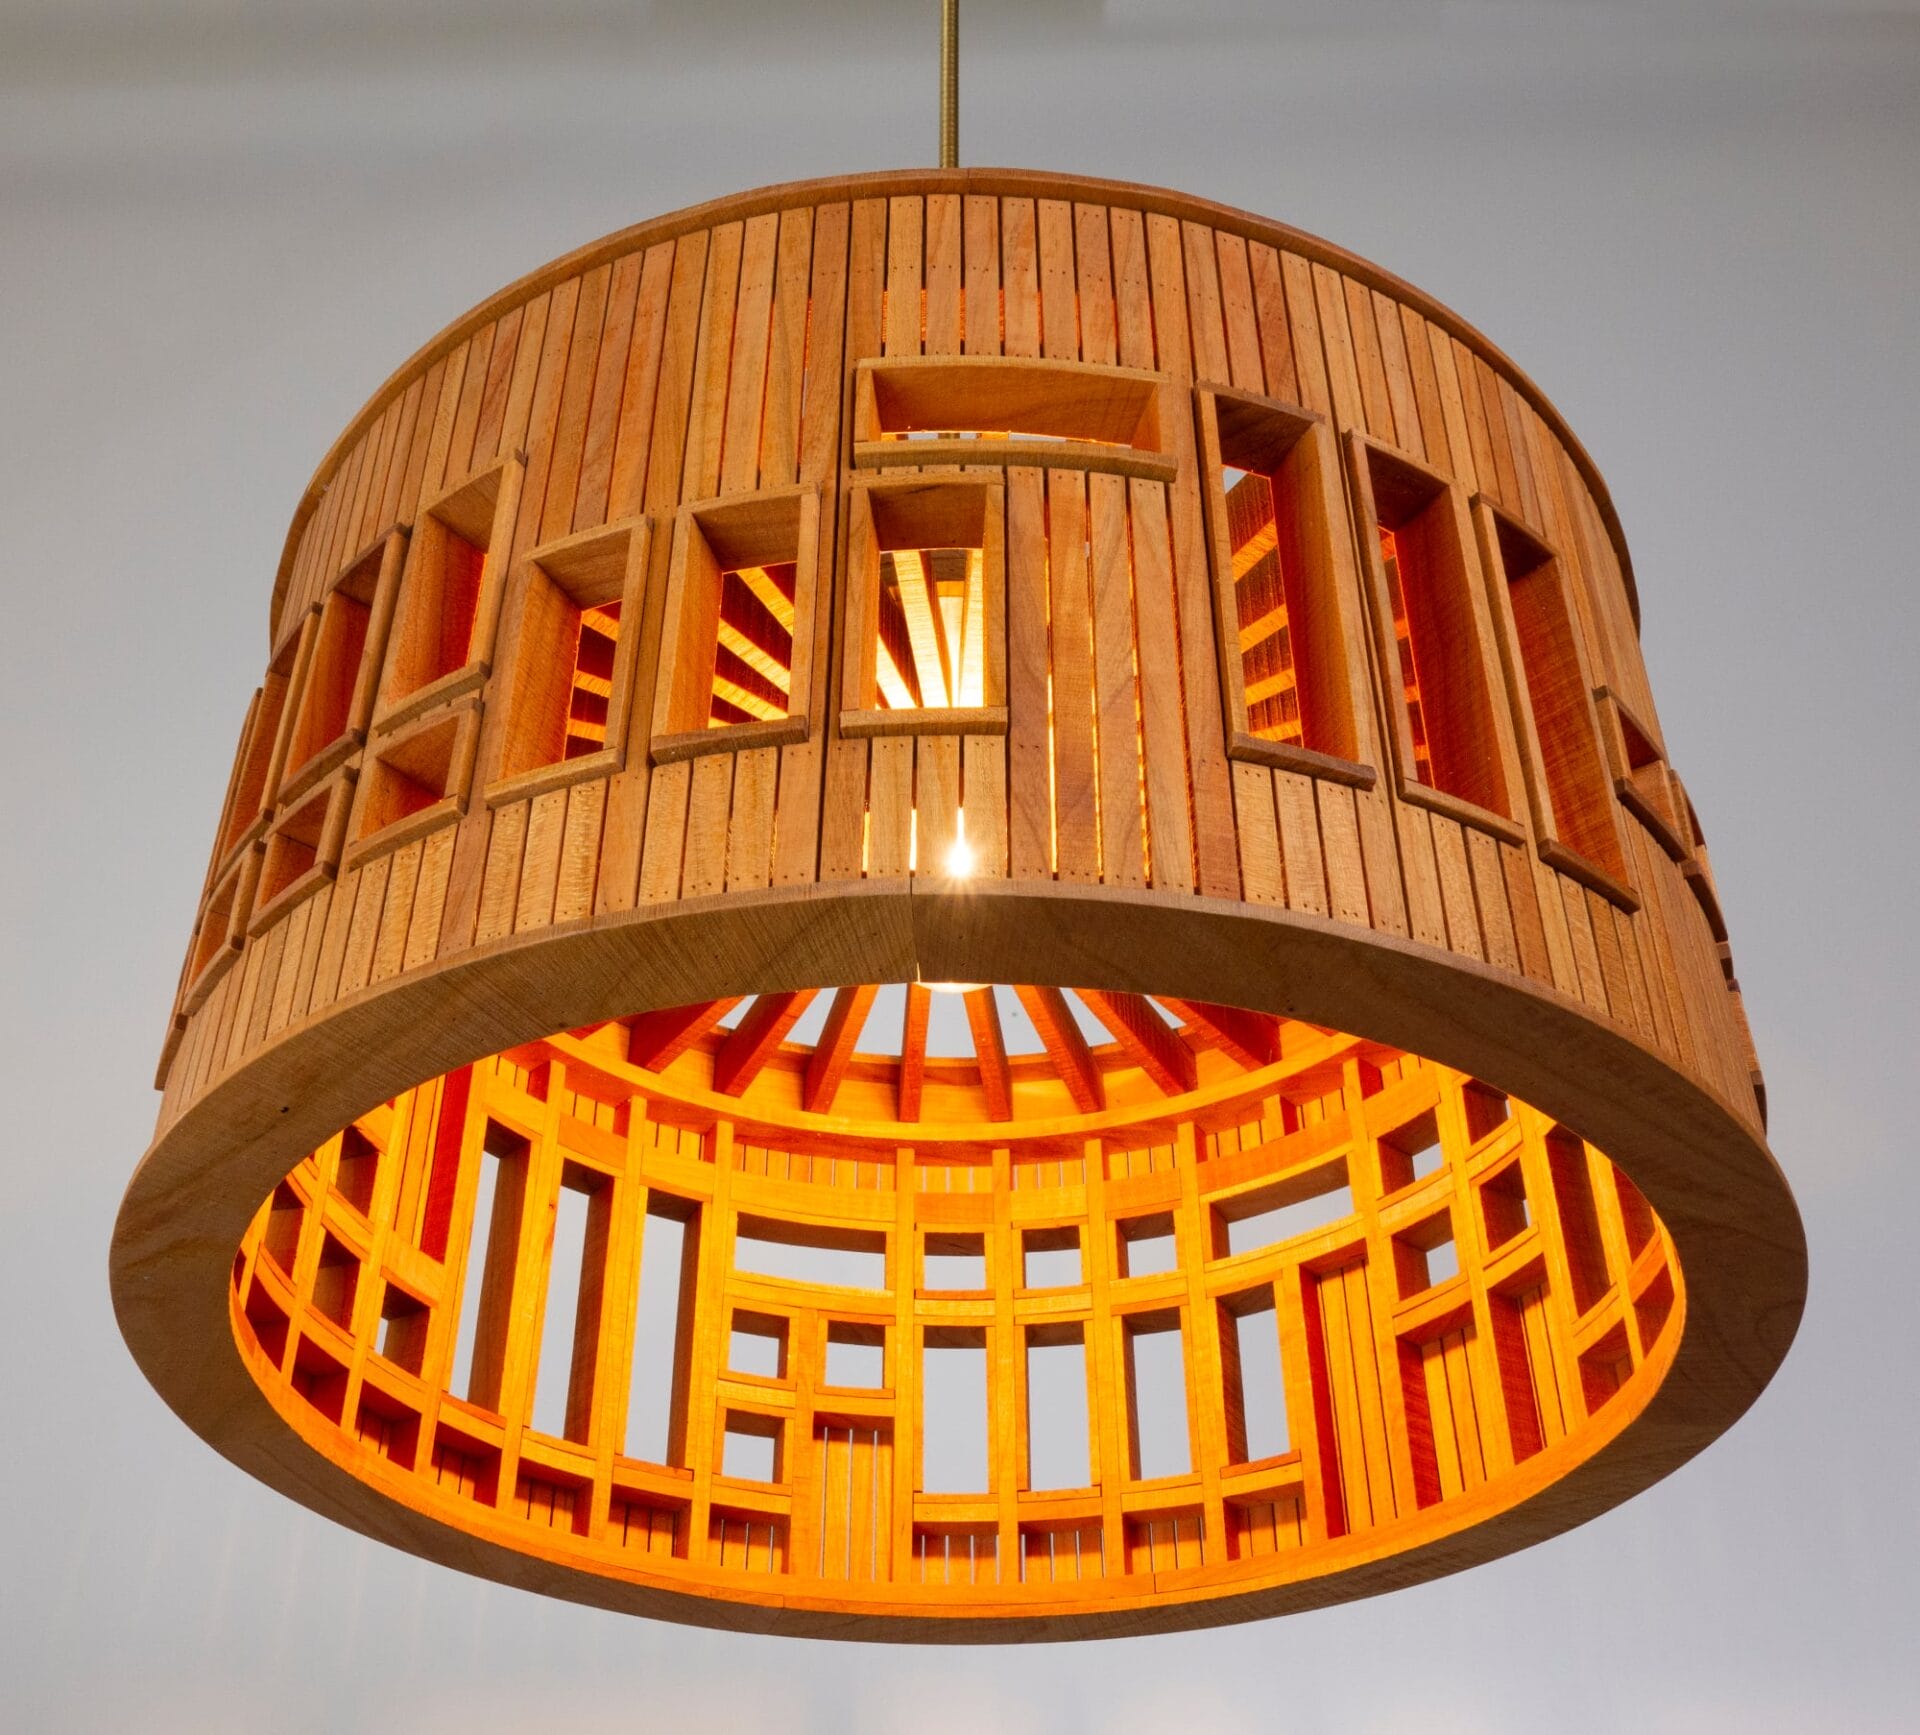 a wooden suspended barrel shade with windows built into the side to appear like a hosue